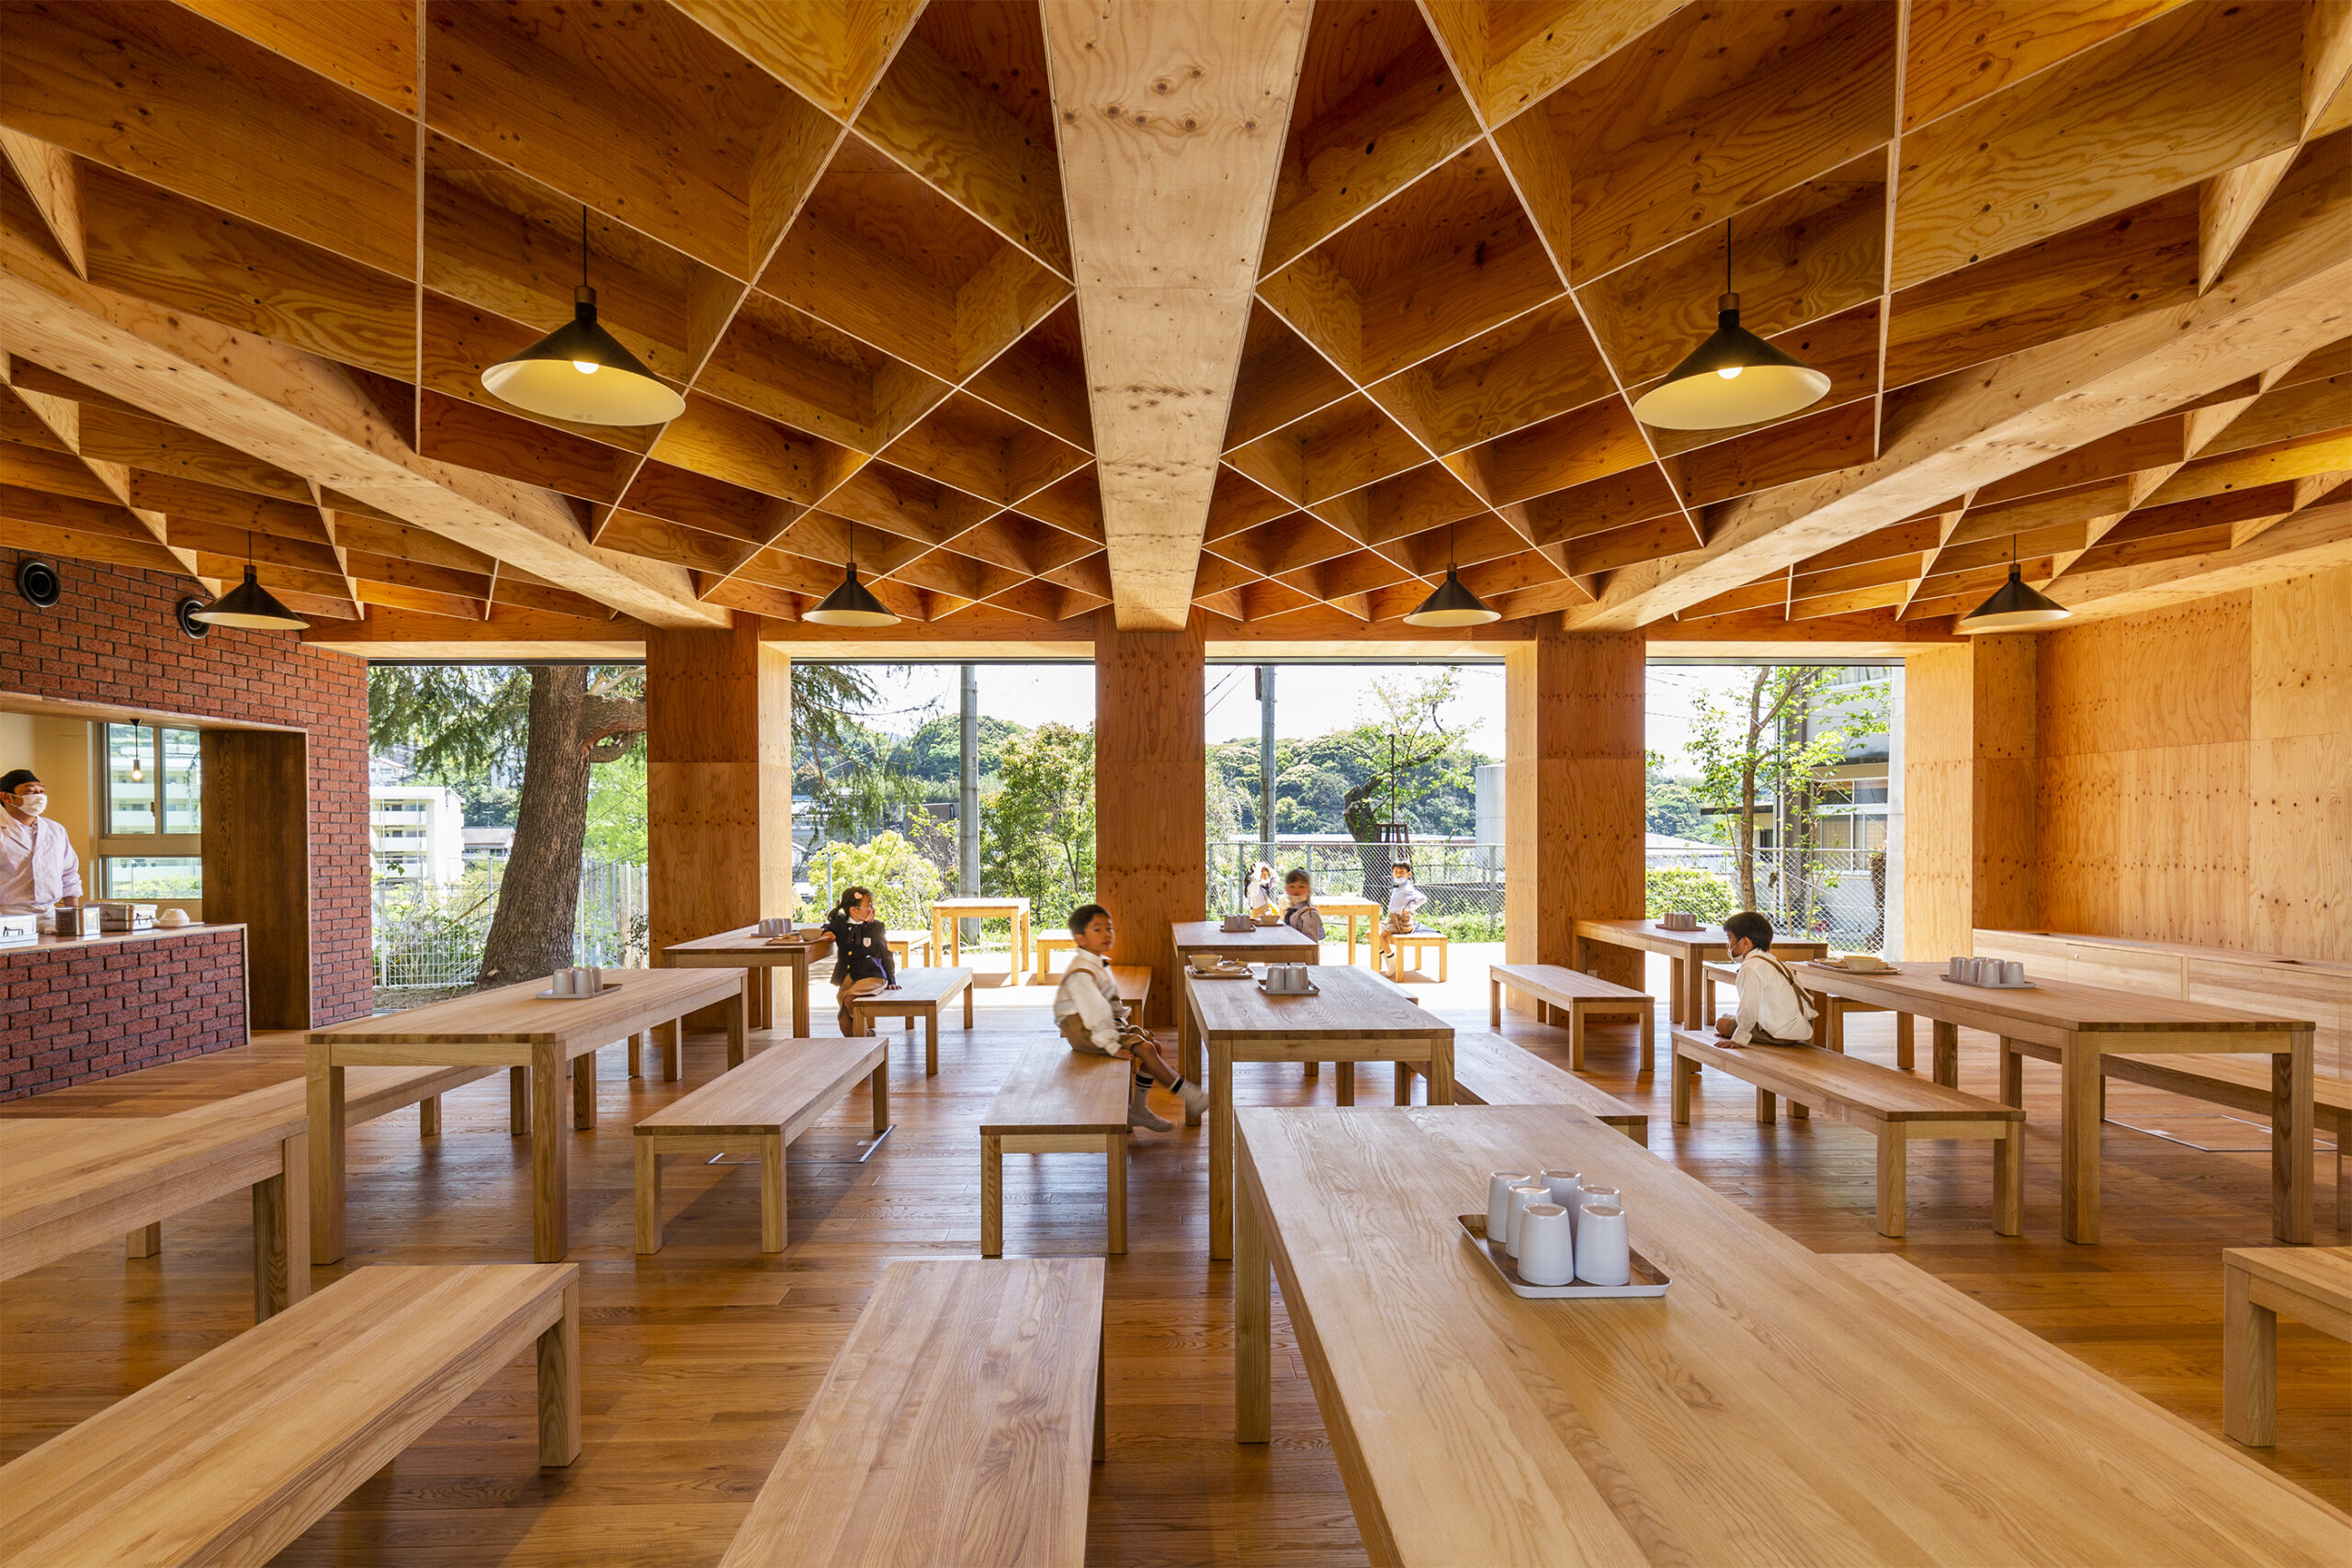 A shot from the dining hall of KB Primary and Secondary School, highlighting its magnificent wooden floors, furniture, and cladding, all adorned in warm hues of natural wood.